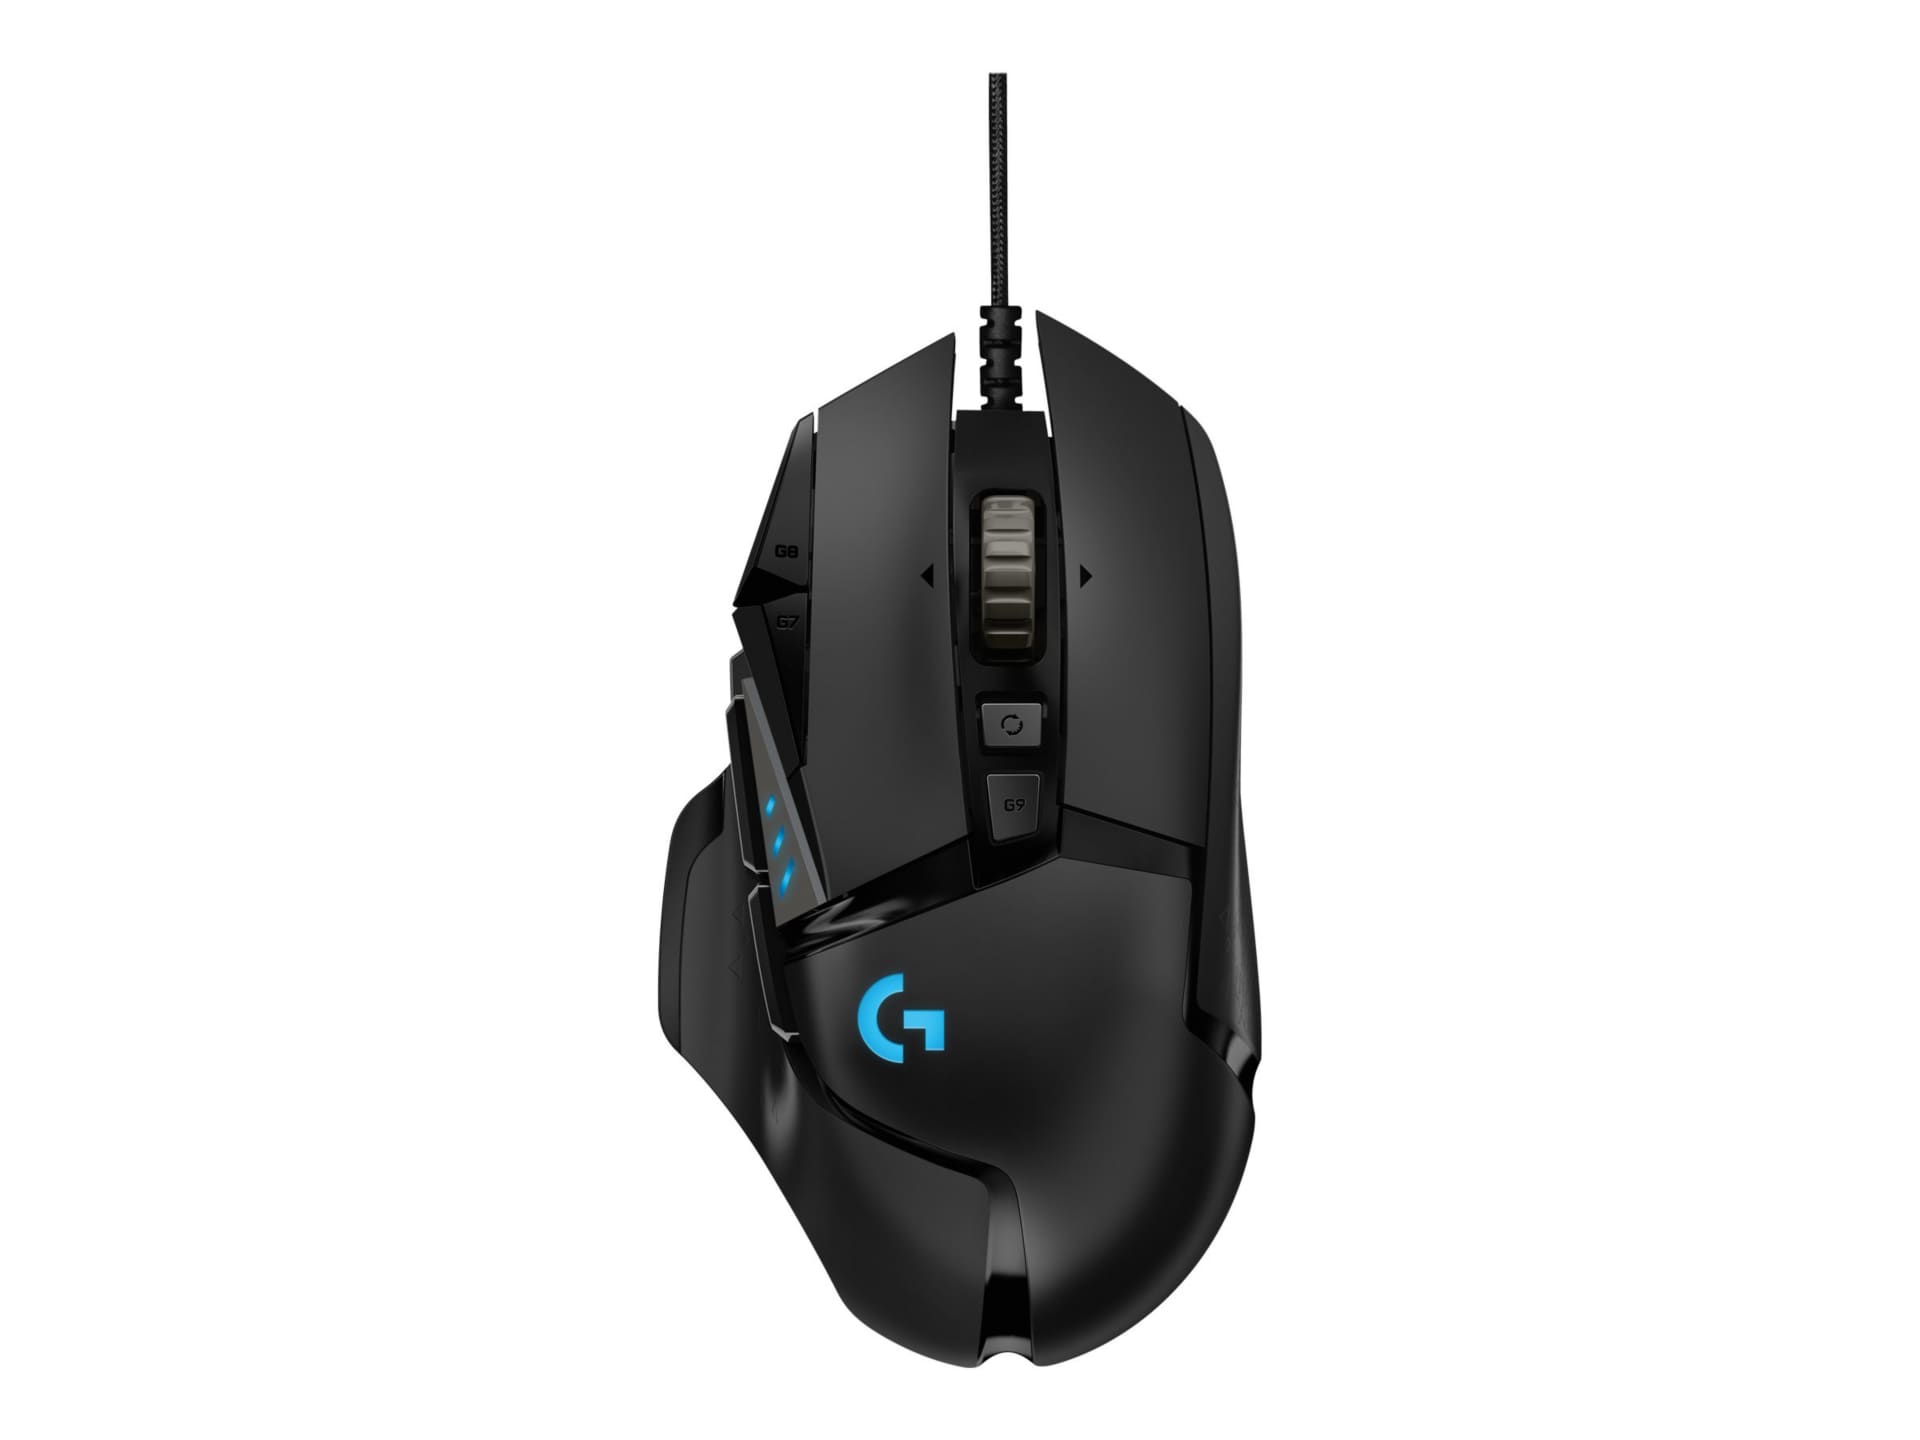 Logitech Gaming Mouse G502 (Hero) - mouse - USB - 910-005469 - Mice - CDW.ca